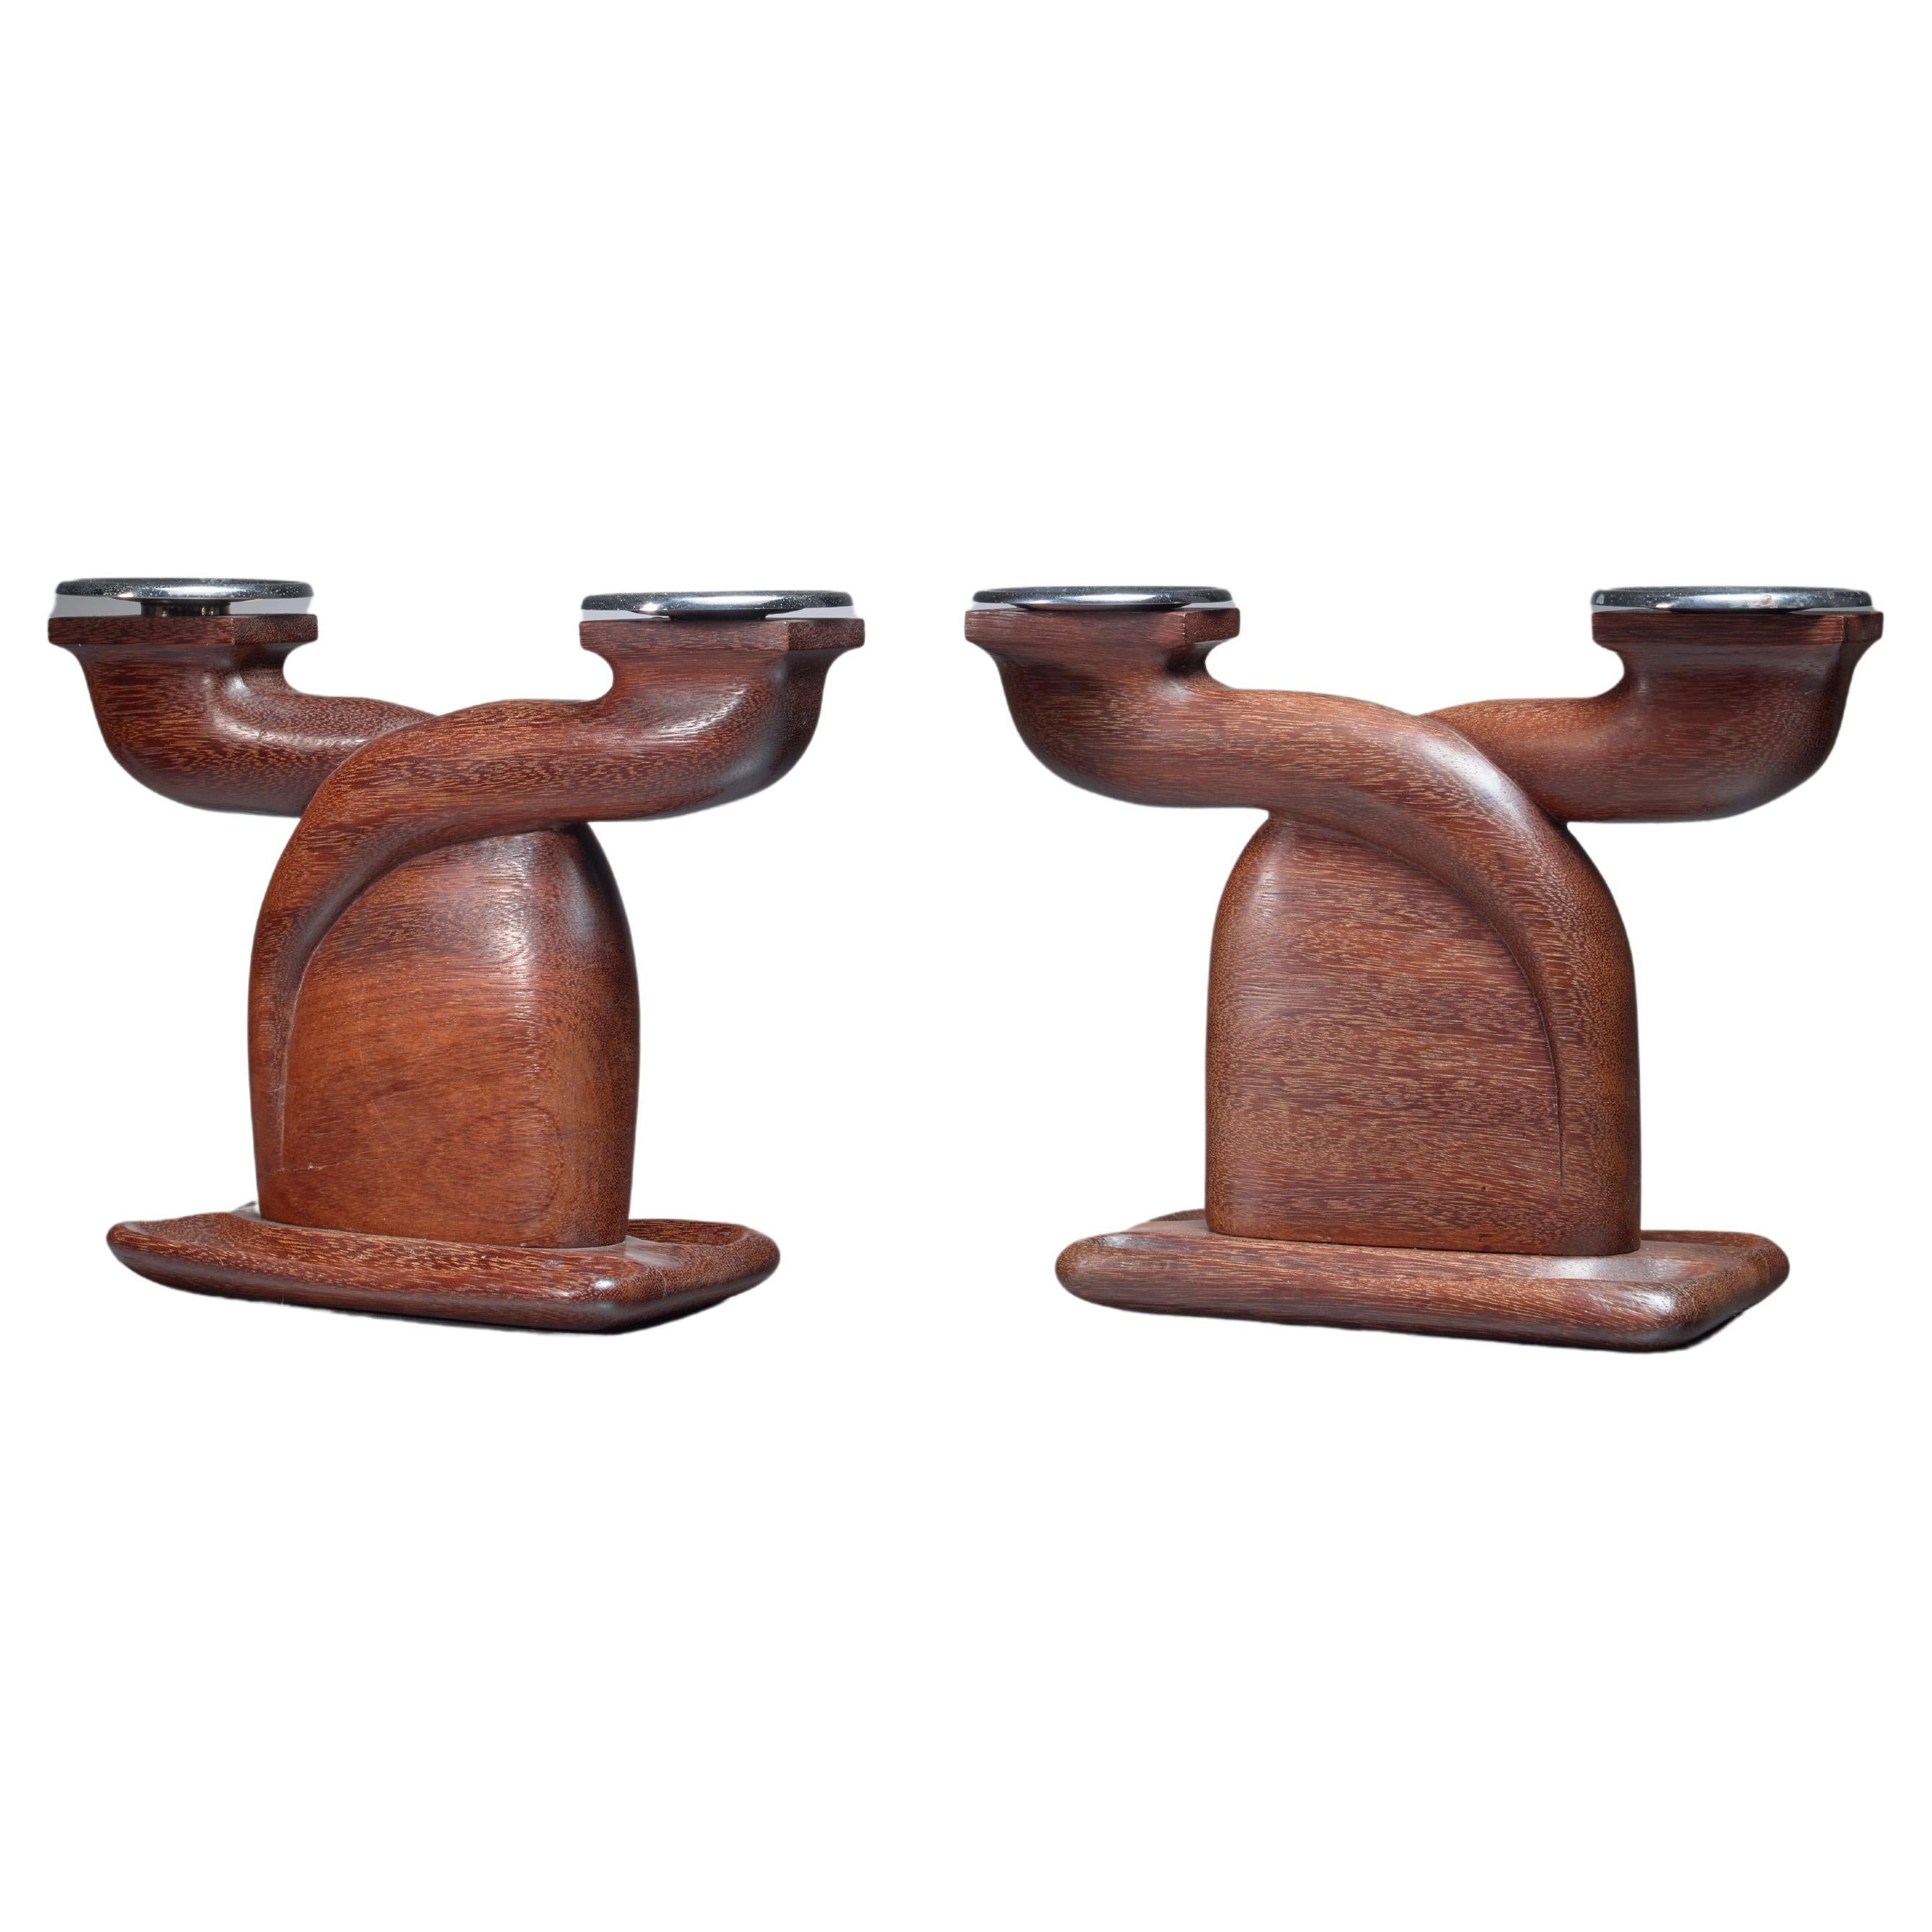 Louis Prodhon Pair of Candleholders in Wenge, France, 1940s